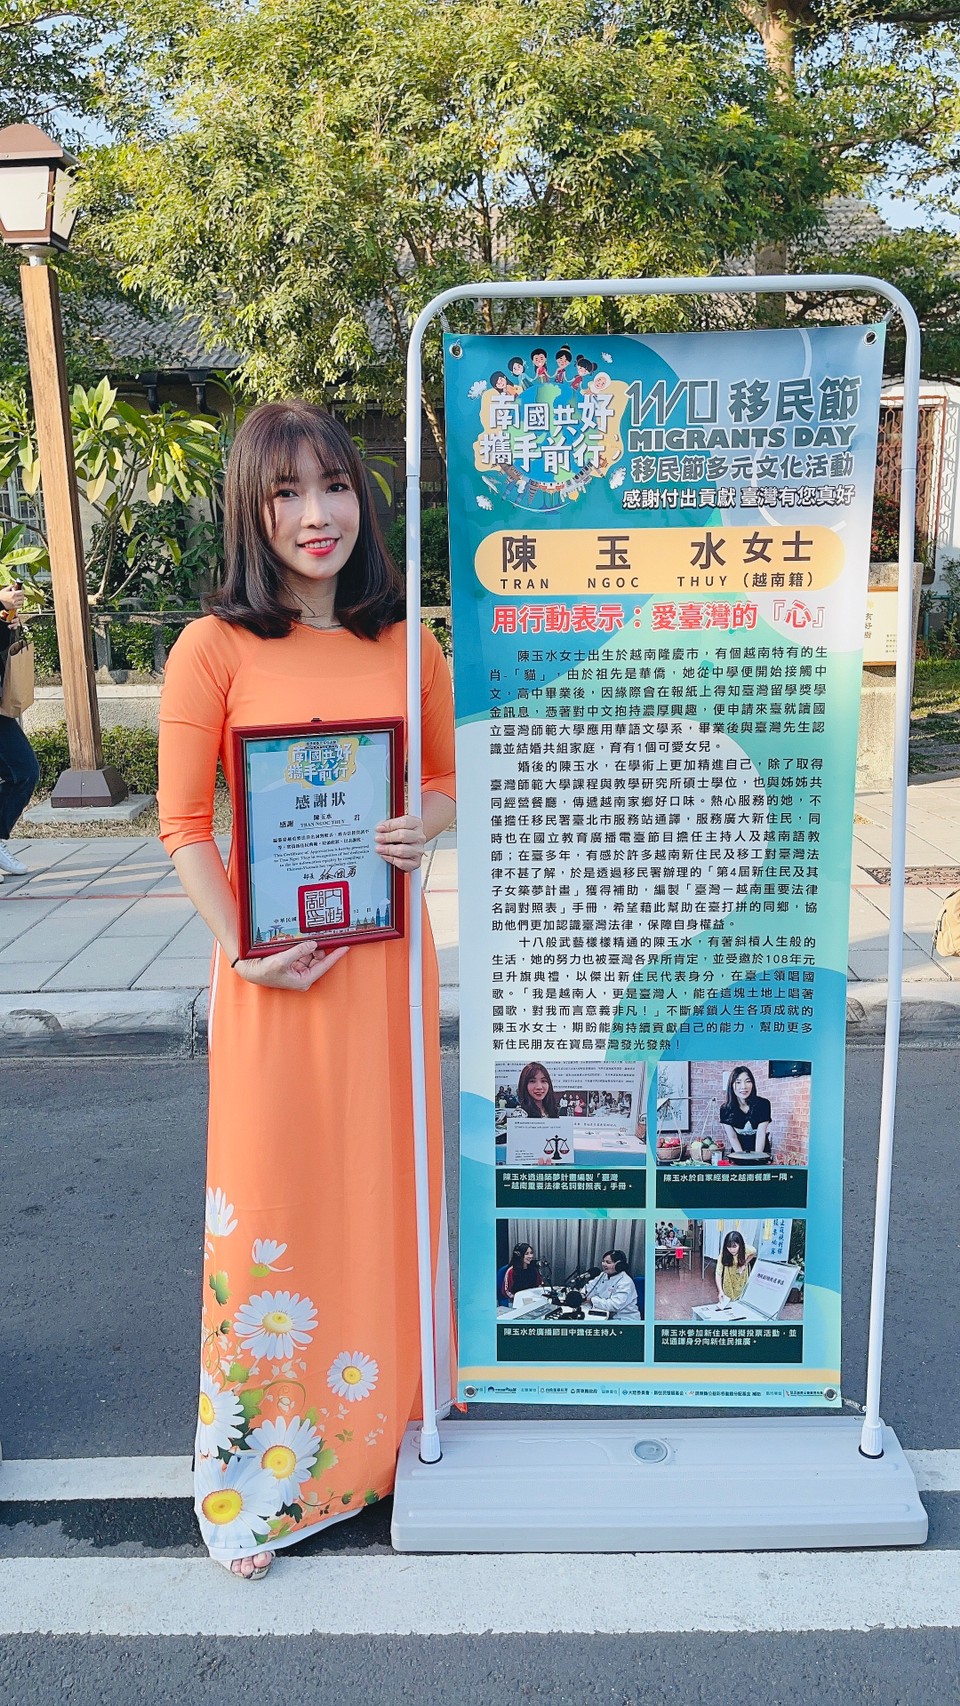 In 2021, Tran Ngoc Thuy received the Excellent New Migrant Award on International Migrants Day. (Photo / Provided by Tran Ngoc Thuy)